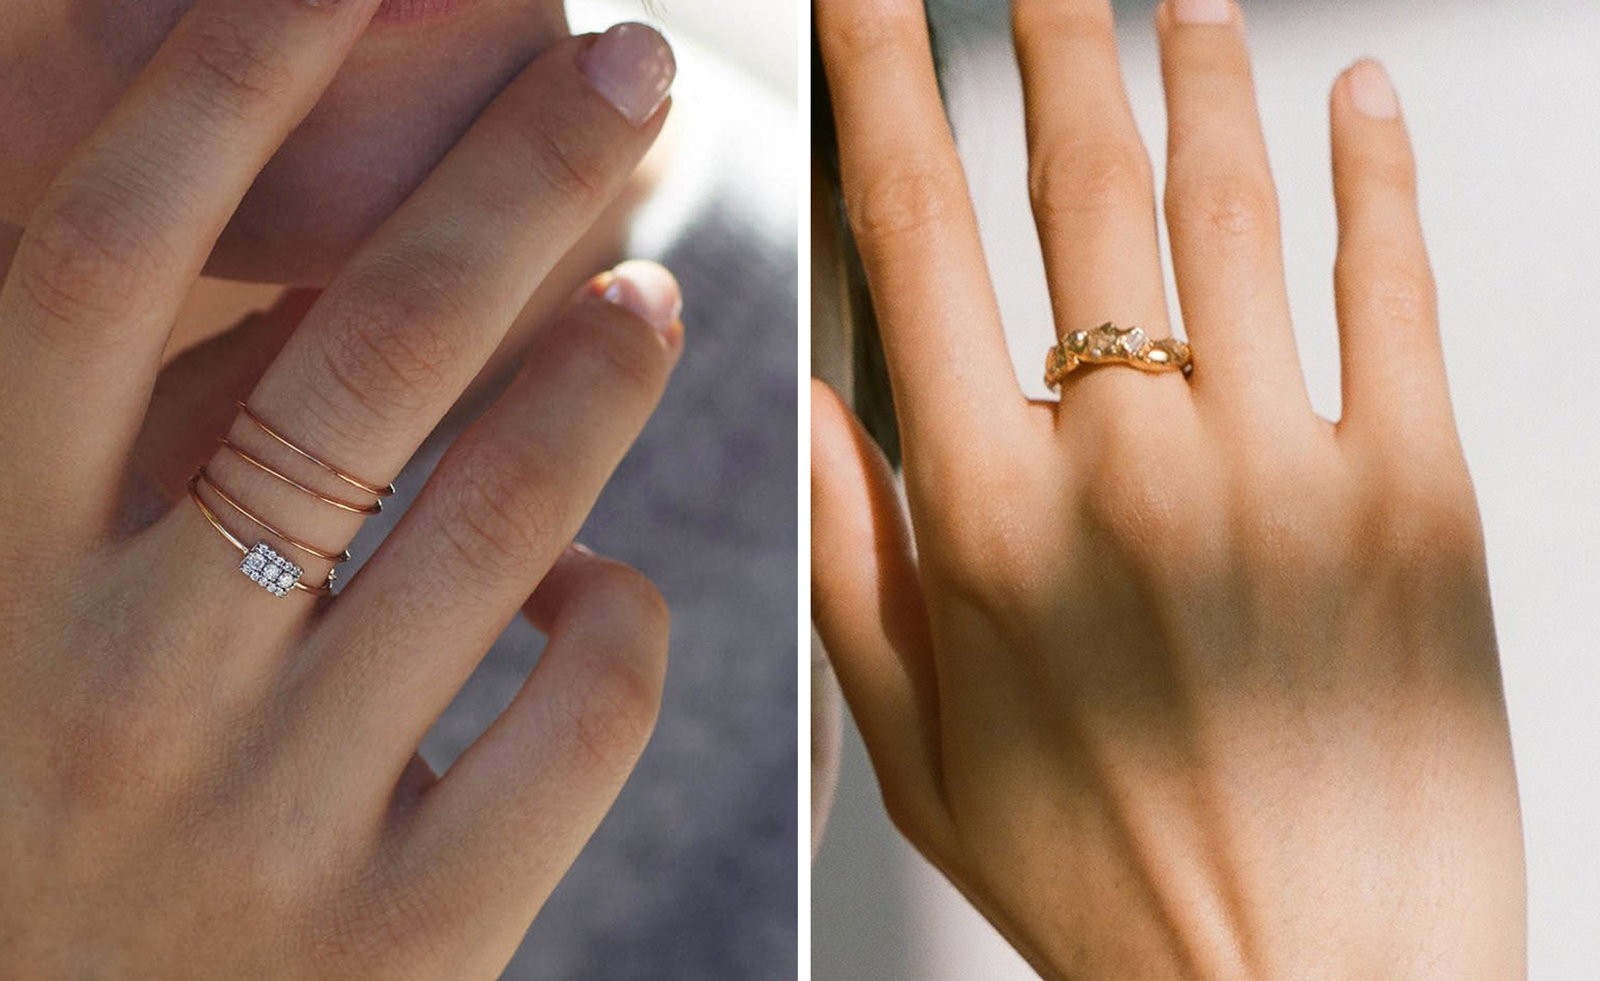 Large Diamond Rings: How to Buy Big Engagement Rings I VRAI